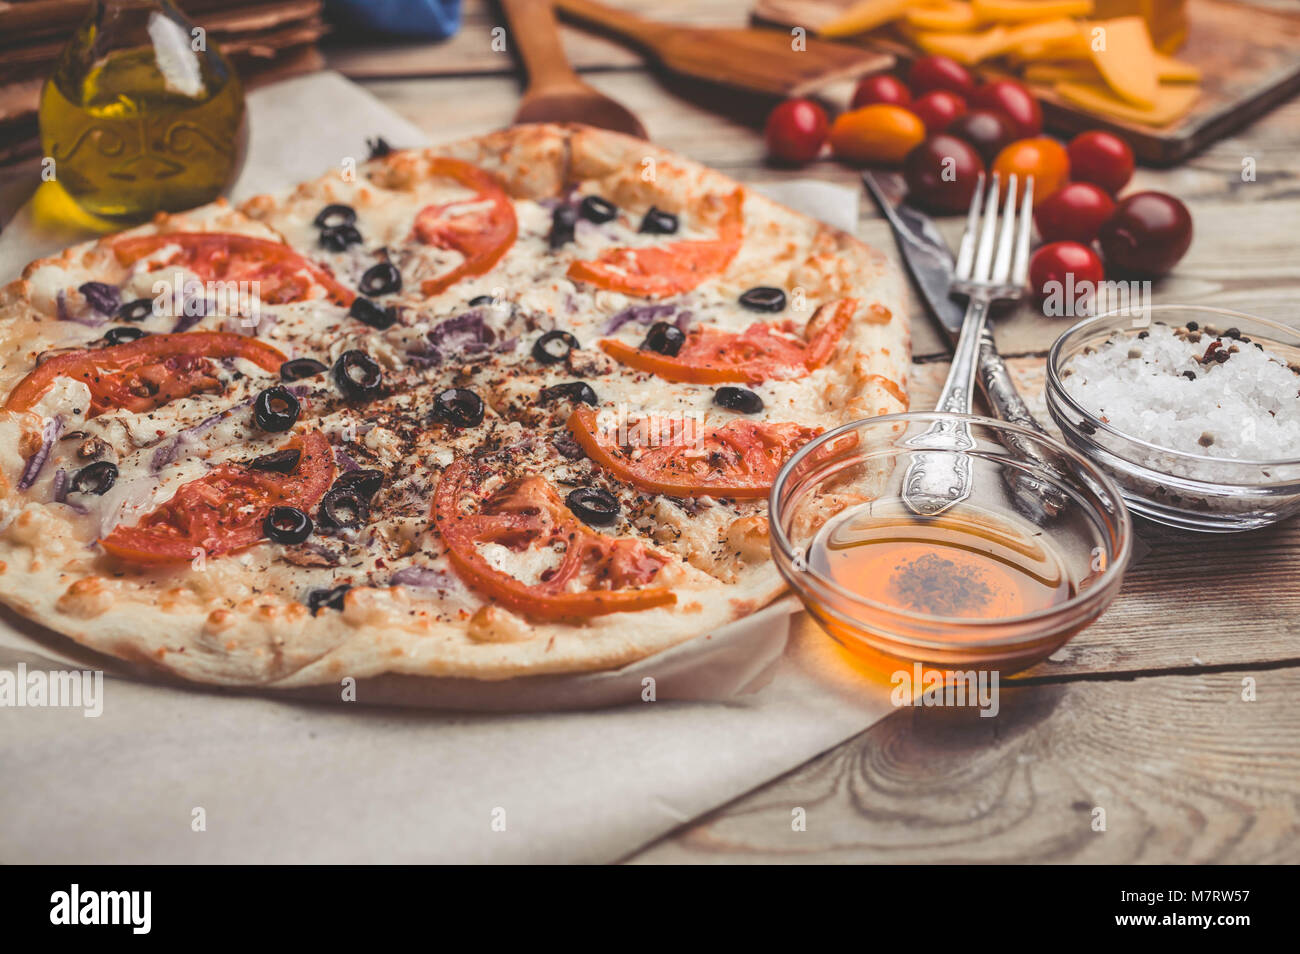 Pizza Margarita on thin crust. Food composition on a wooden background. Mediterranean traditional cuisine. Easy vintage toning Stock Photo